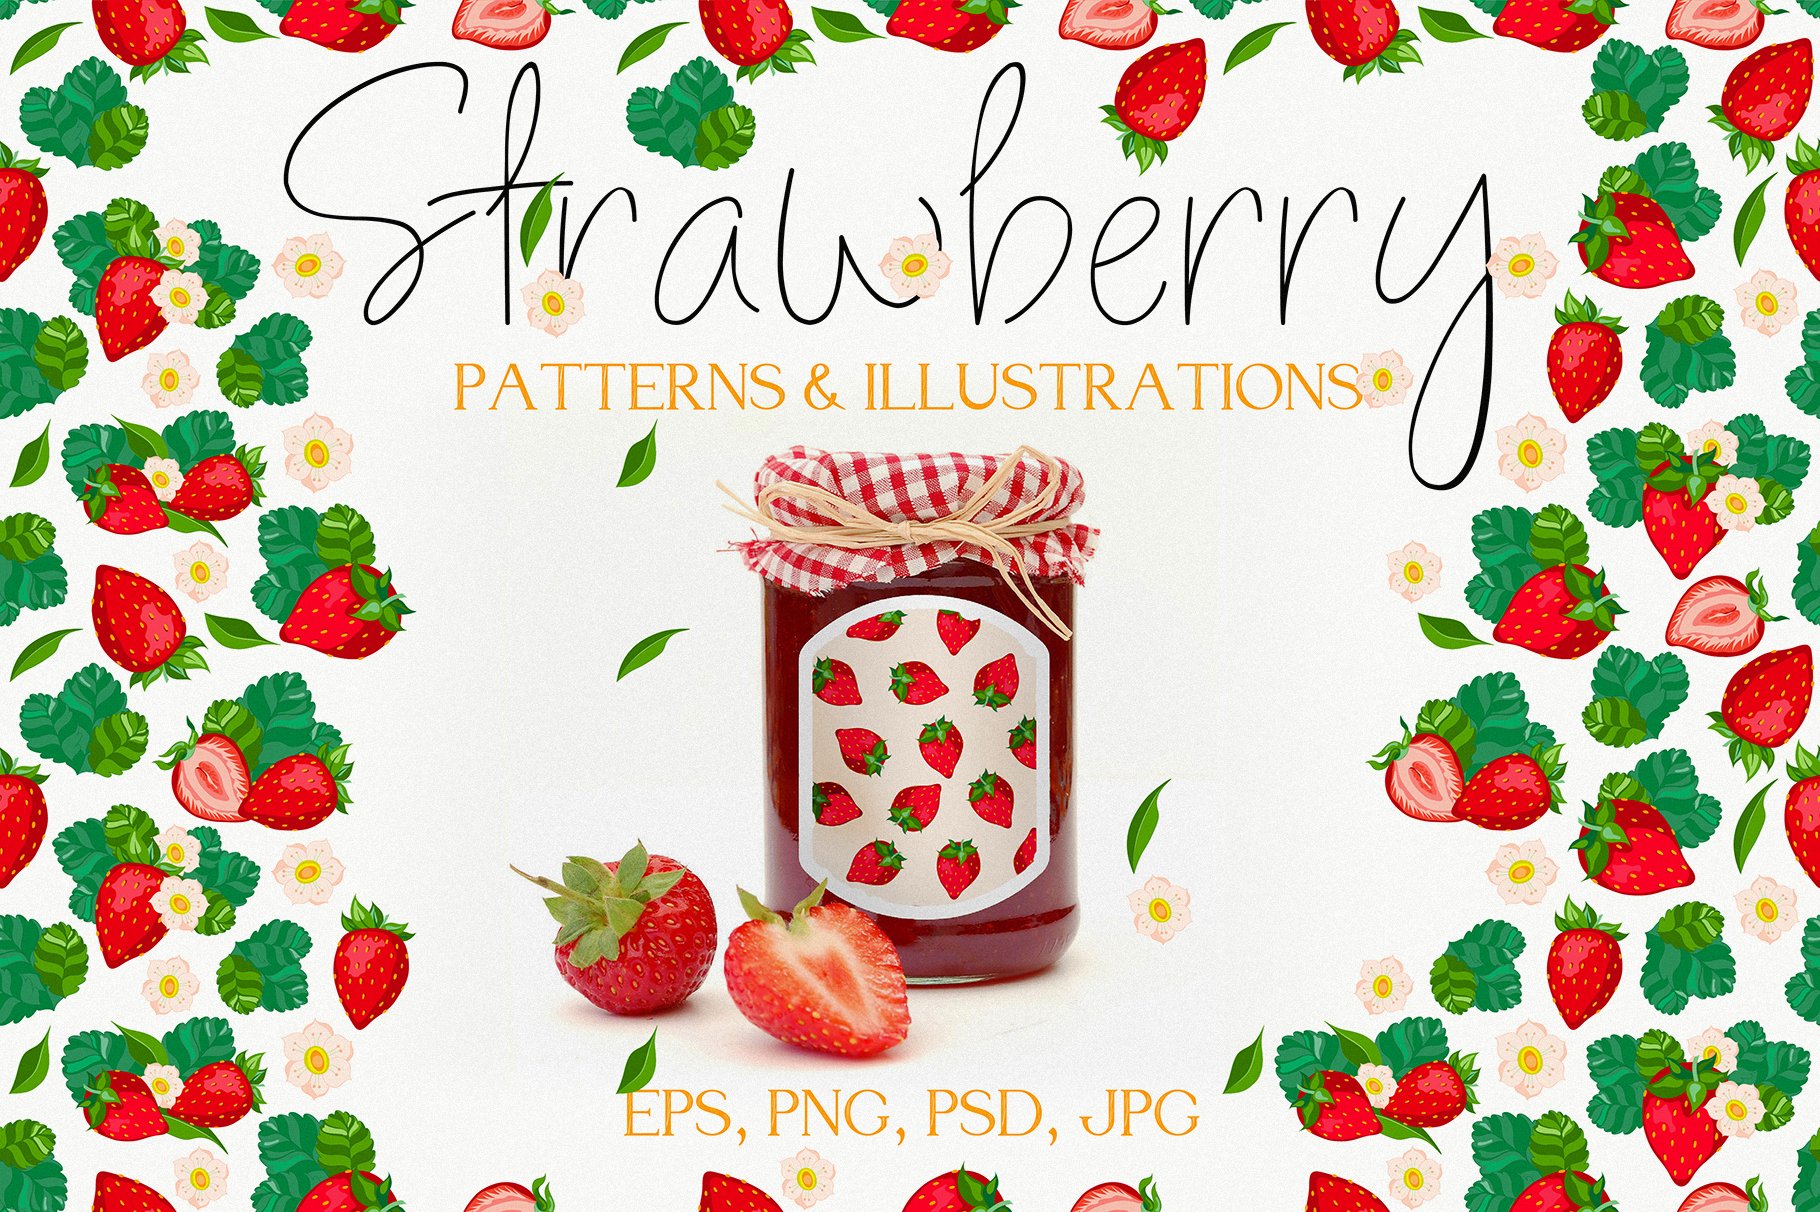 Black lettering "Strawberry" and illustration of a strawberry jam in a glass jar.